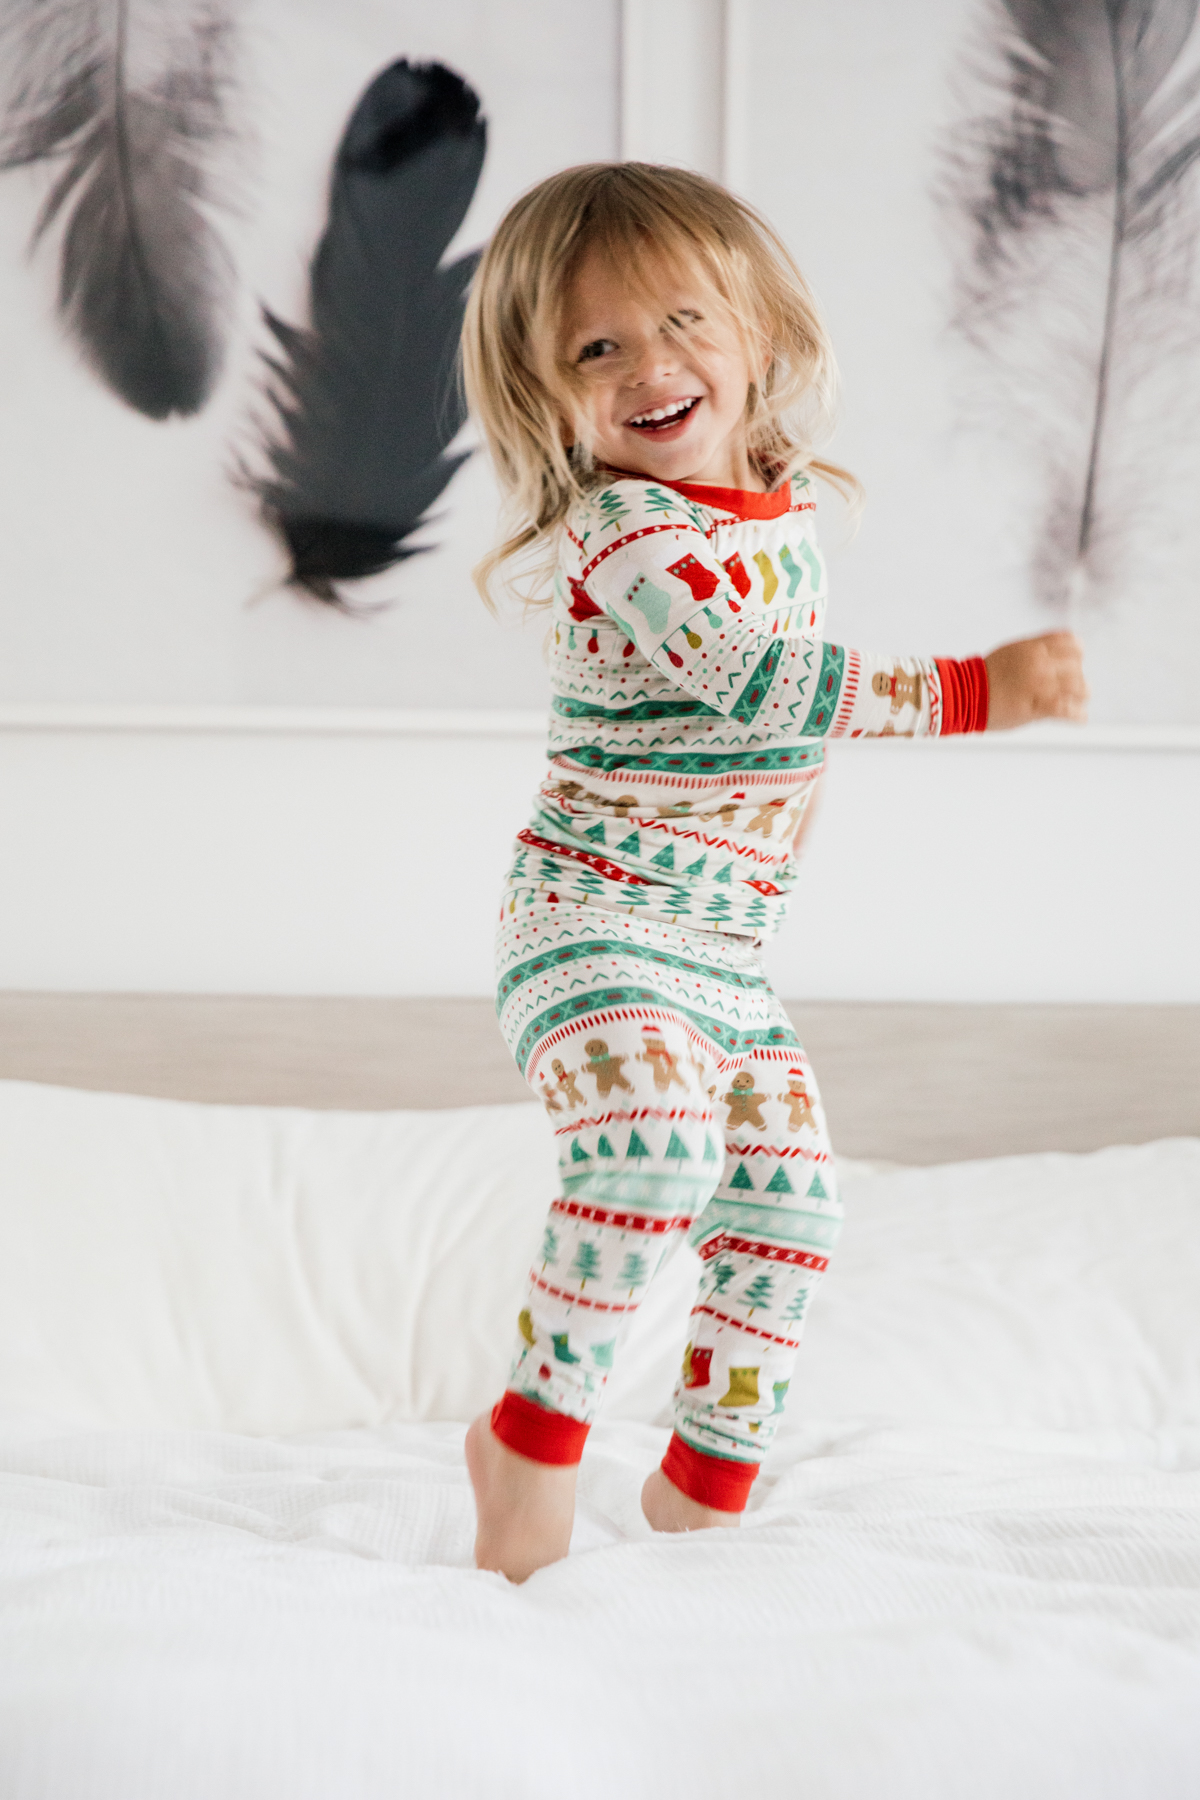 Toddler in Holiday pajamas jumping on the bed